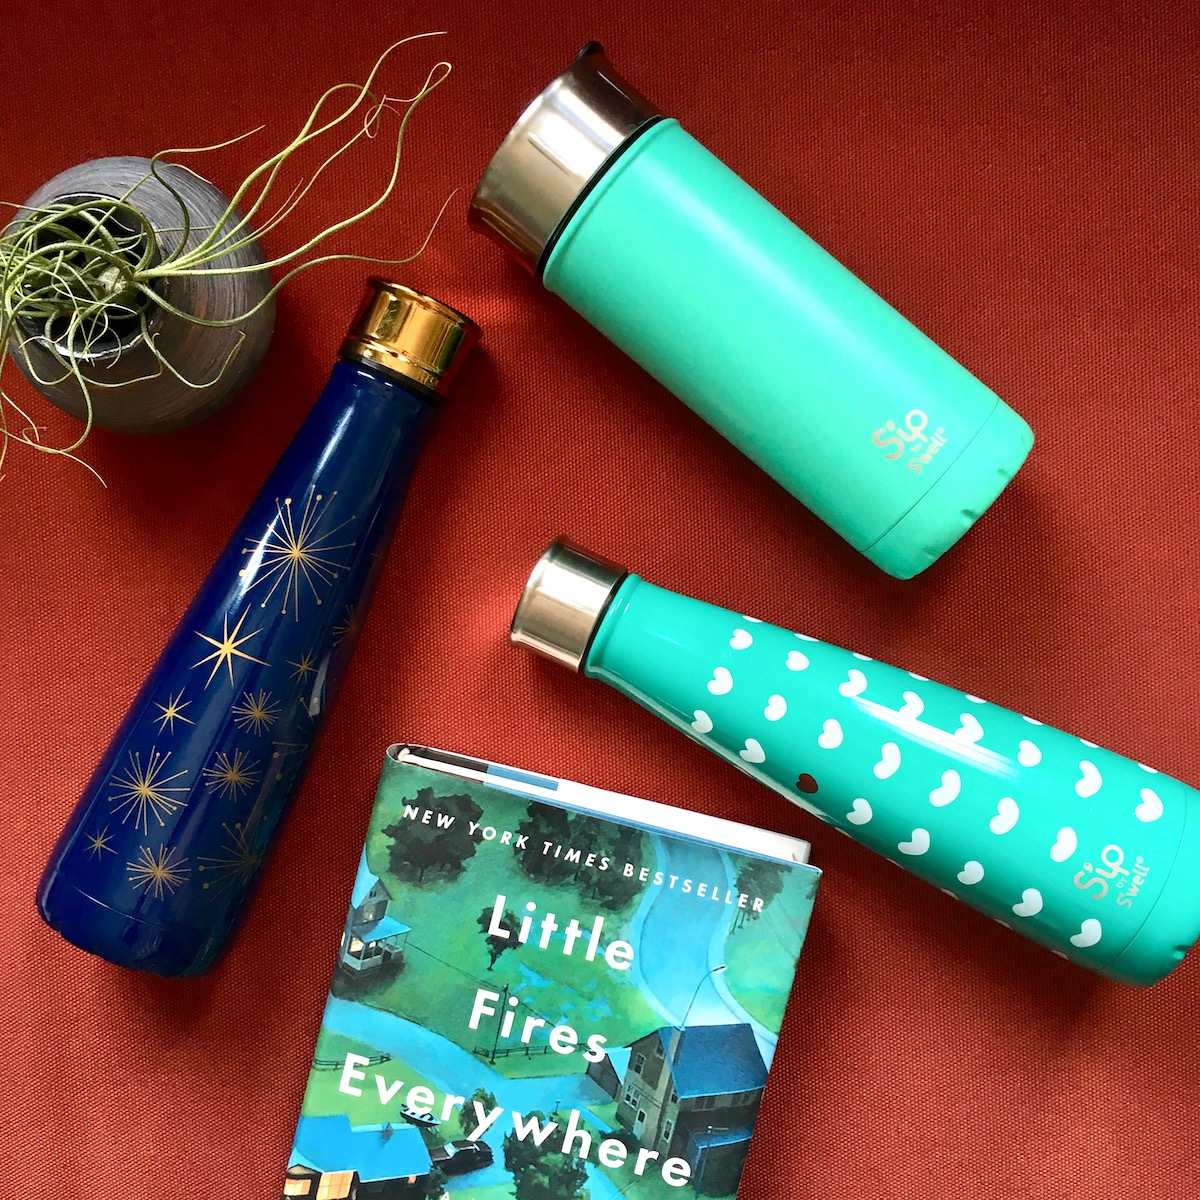 Three S'ip by S'well water bottles laying against a red background, next to a book and a plant. The book is "Little Fires Everywhere" by Celeste Ng.